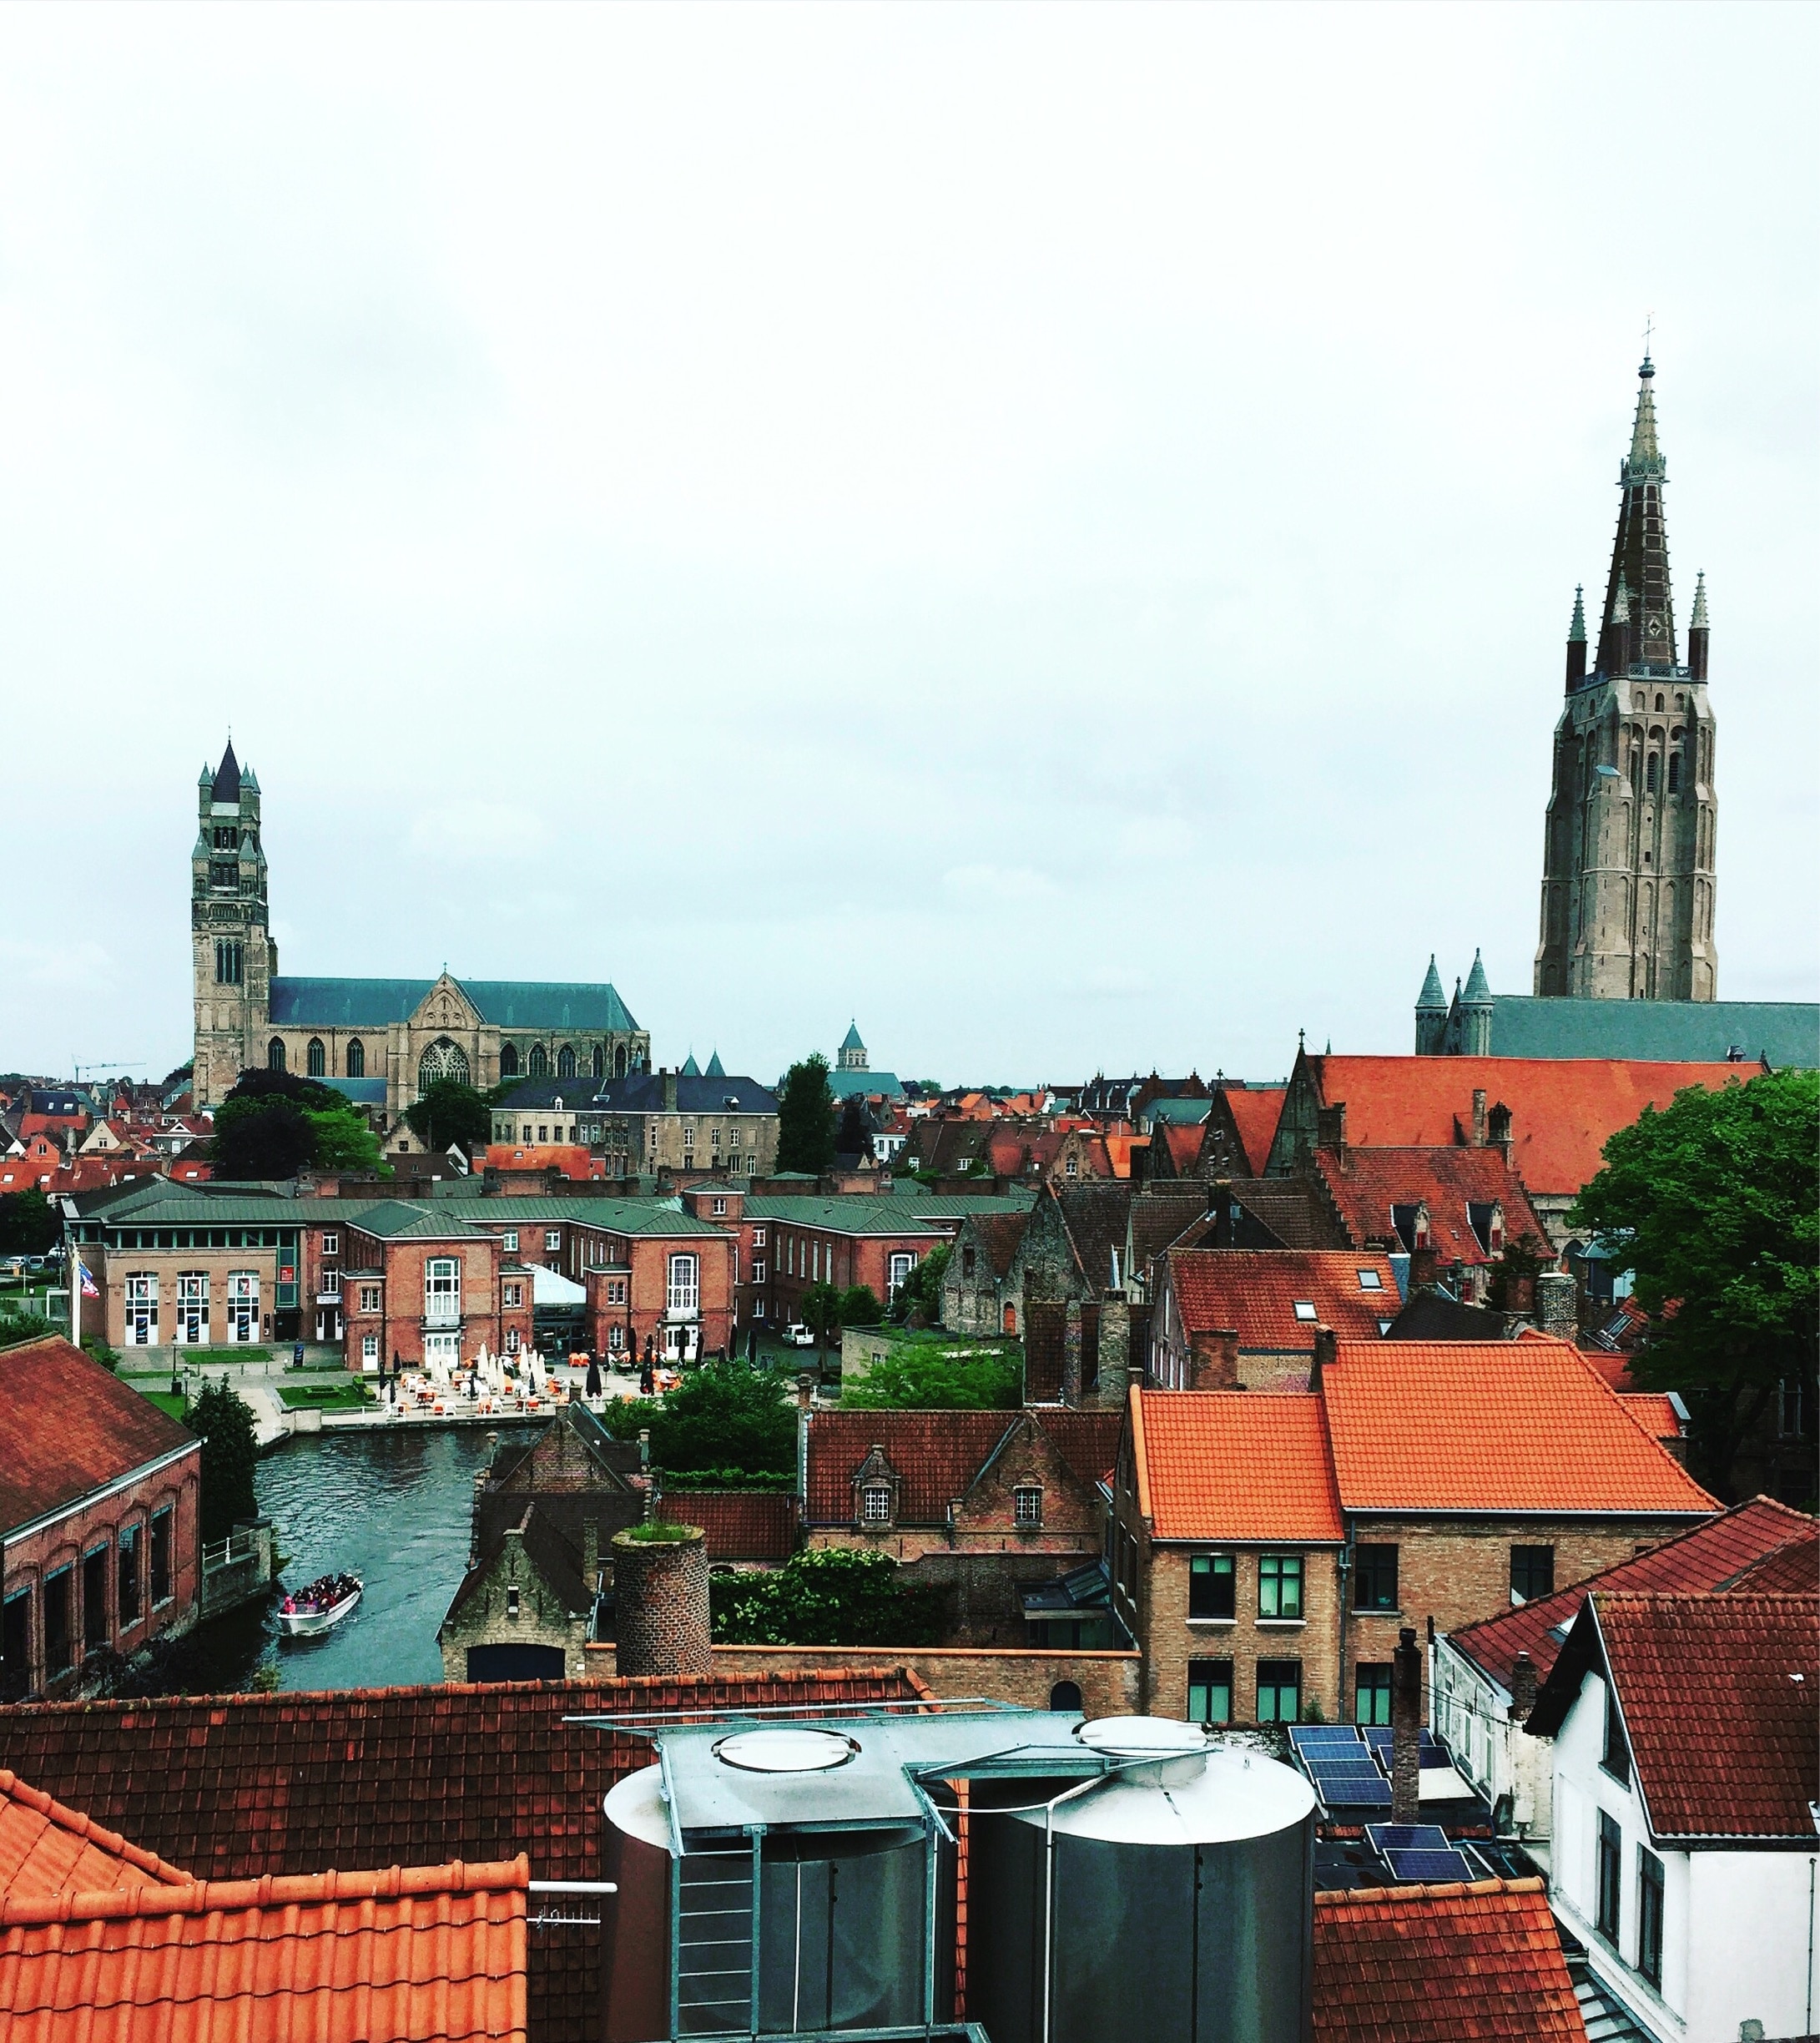 The brewery tour at De Halve Mann was great. Really informative and fun. View from the rooftop of the brewery! 